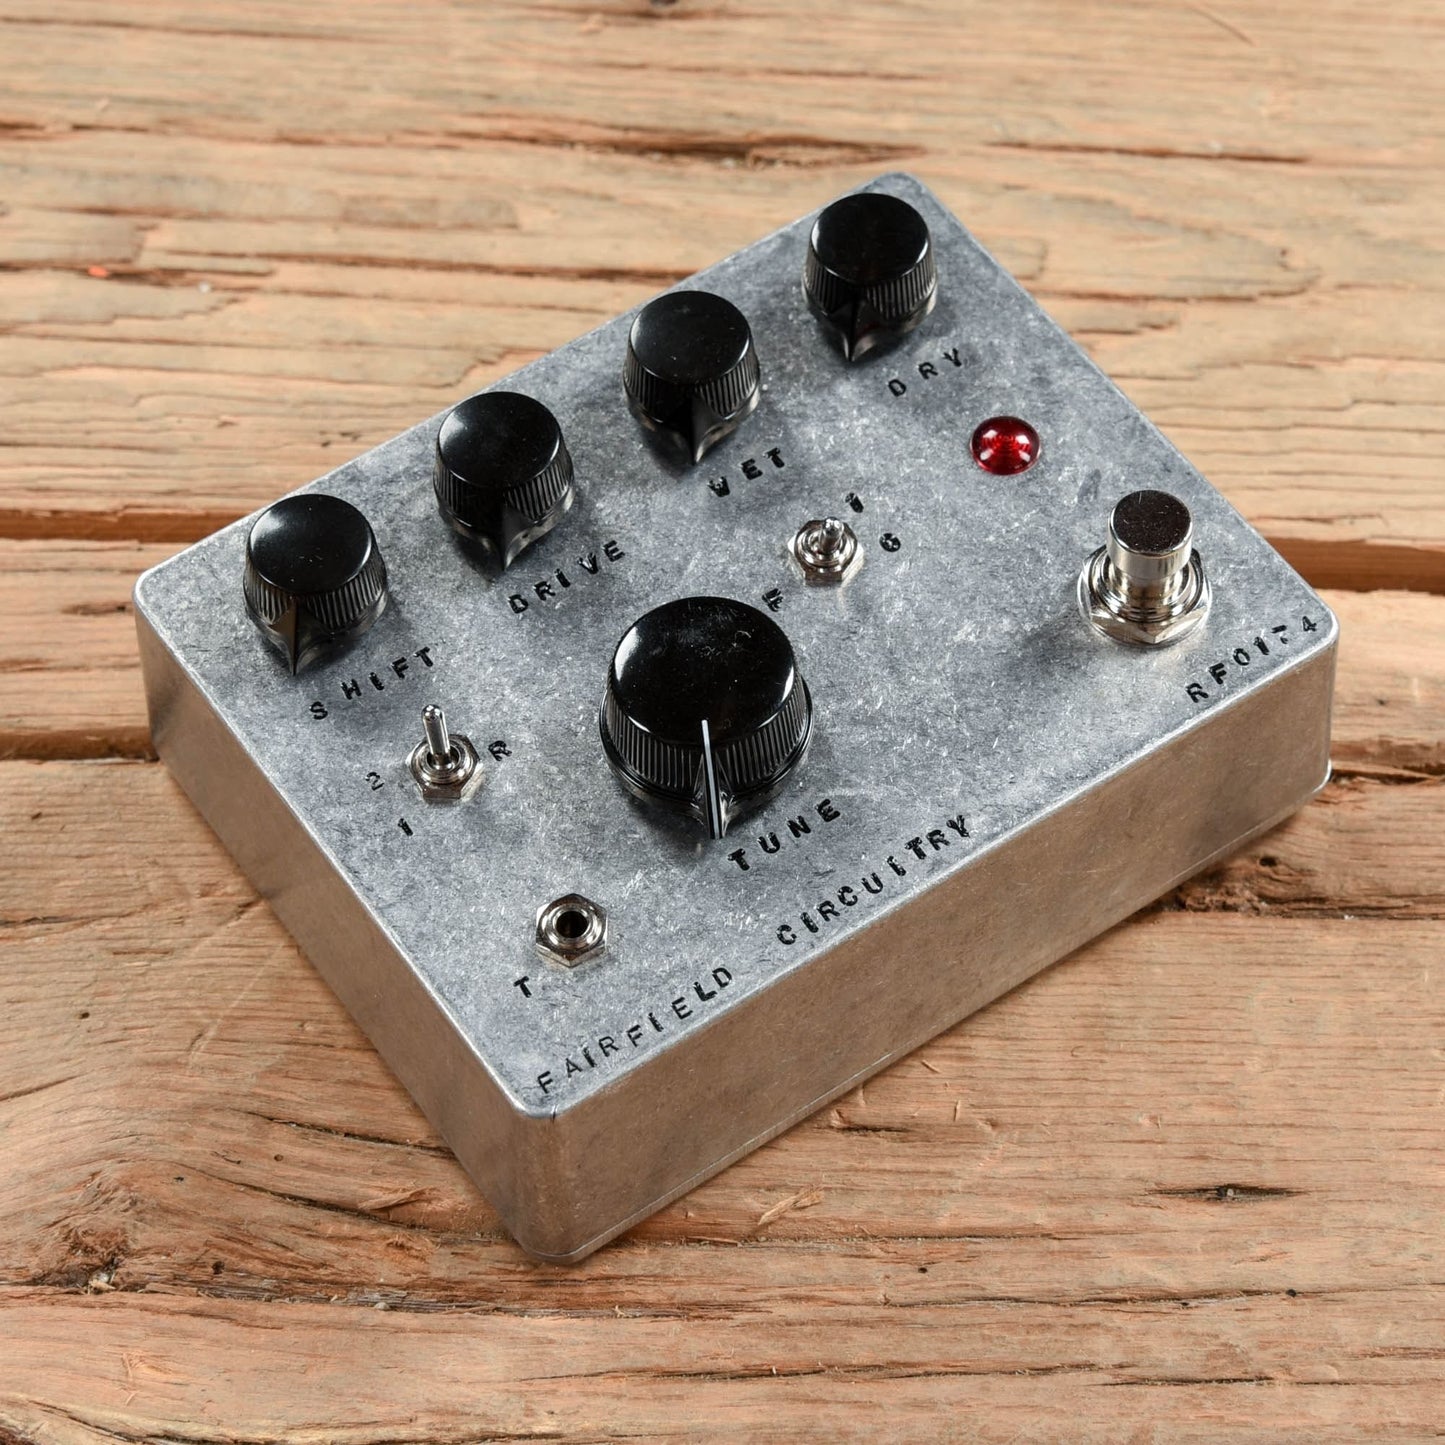 Fairfield Circuitry Roger That Effects and Pedals / Overdrive and Boost